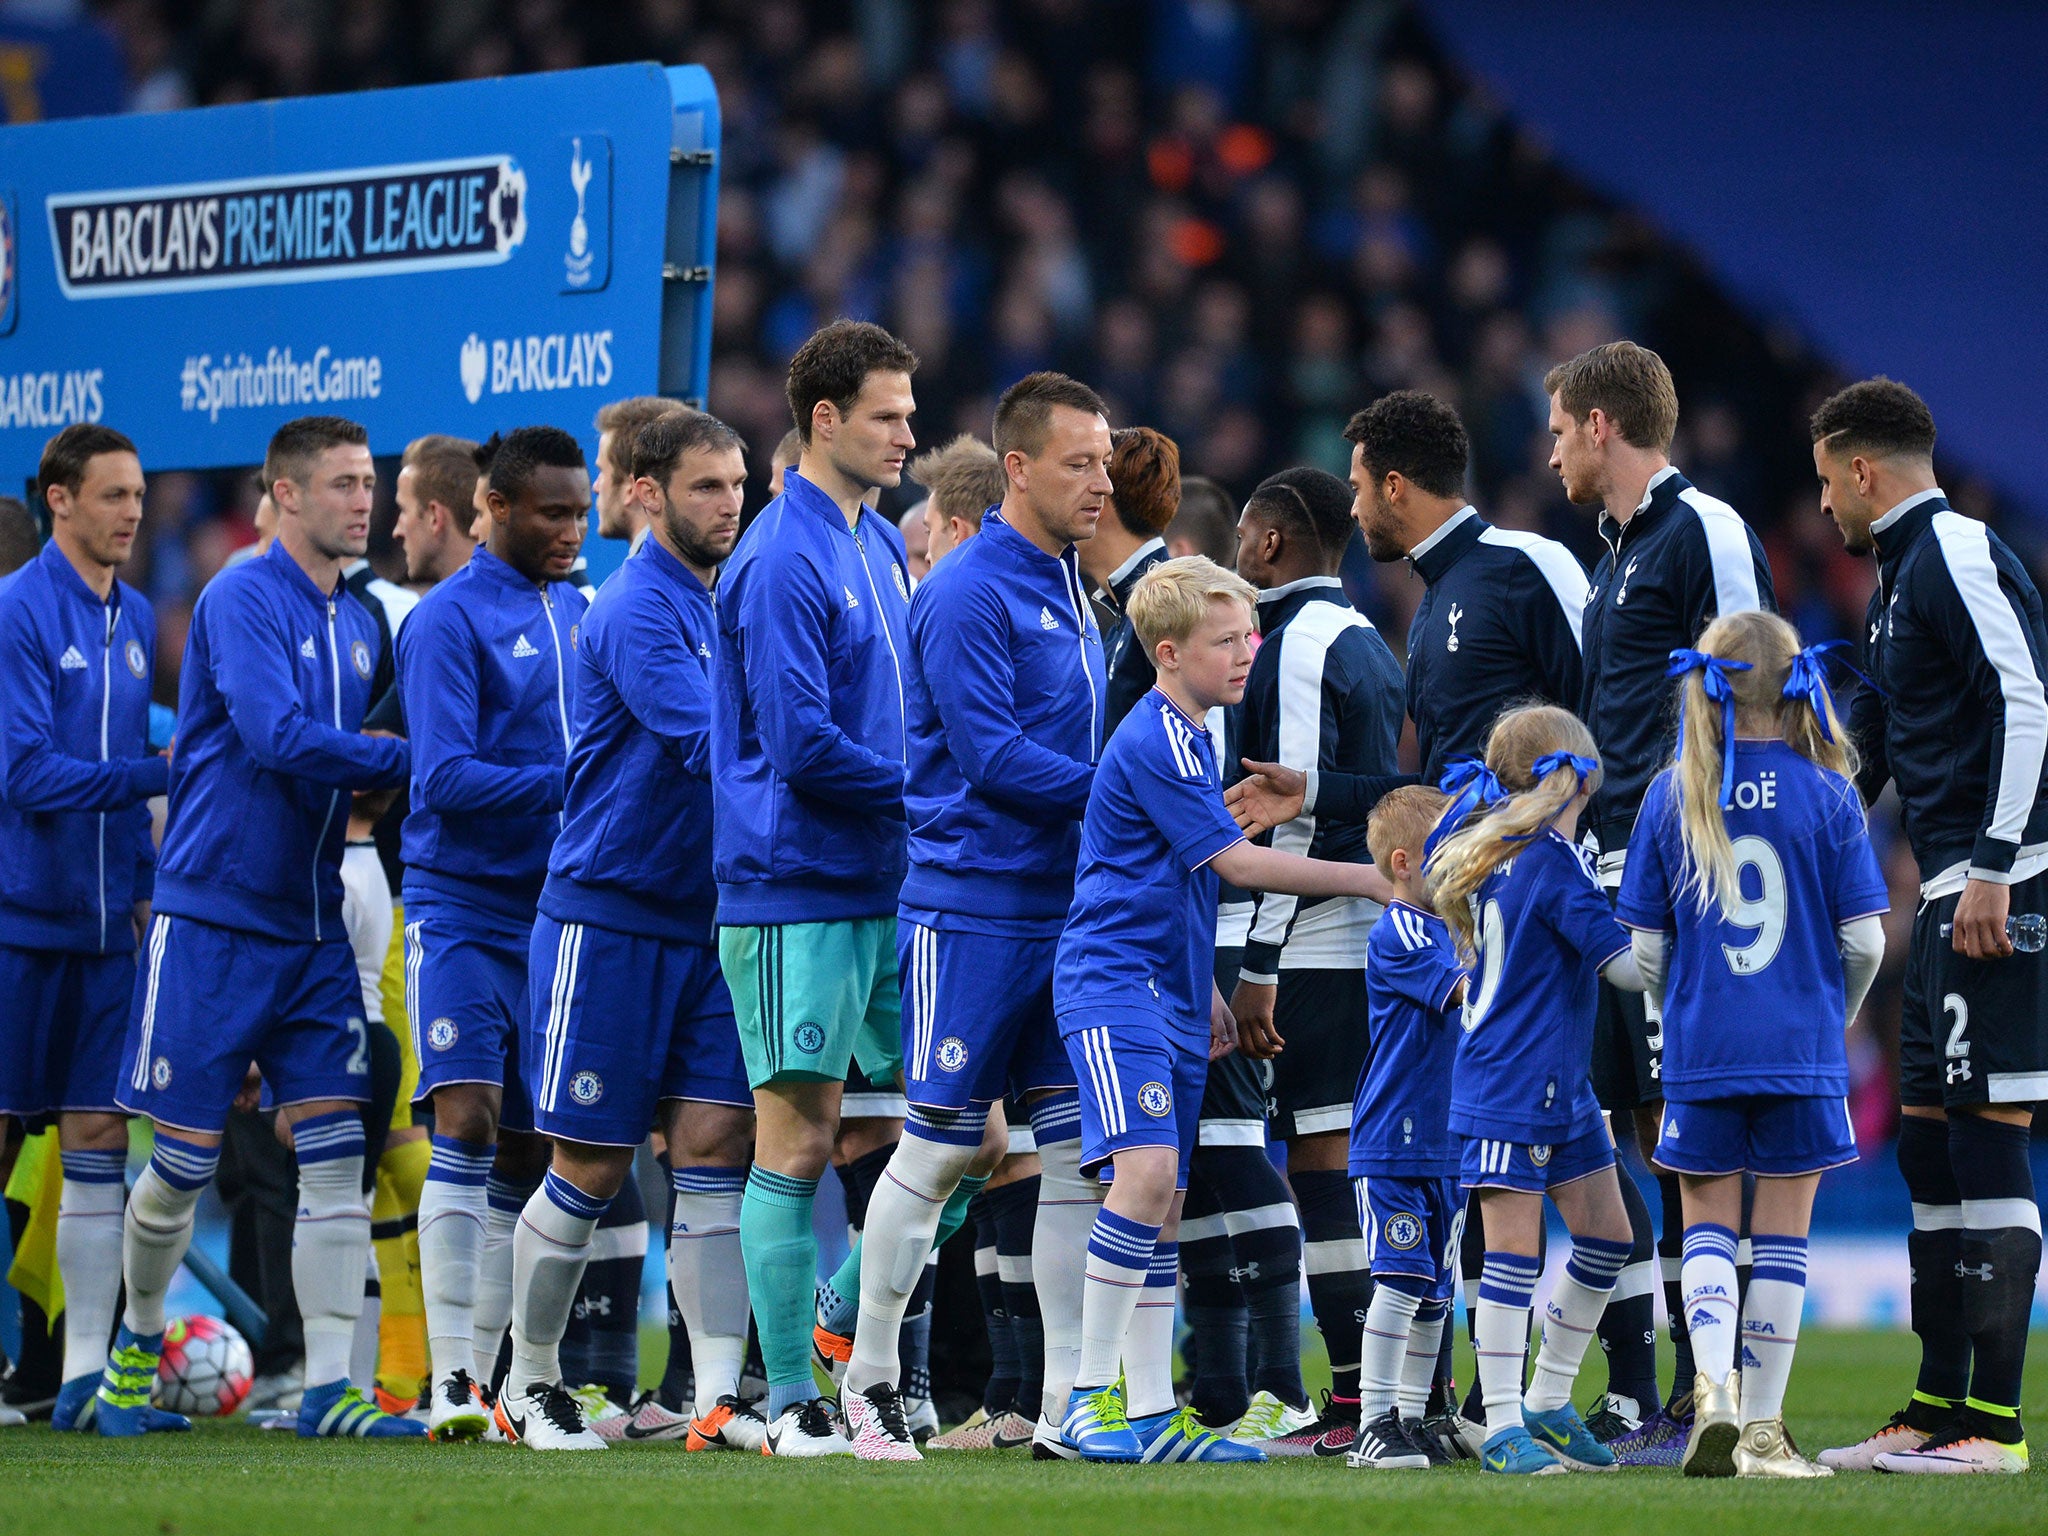 The Tottenham and Chelsea players just before kick off